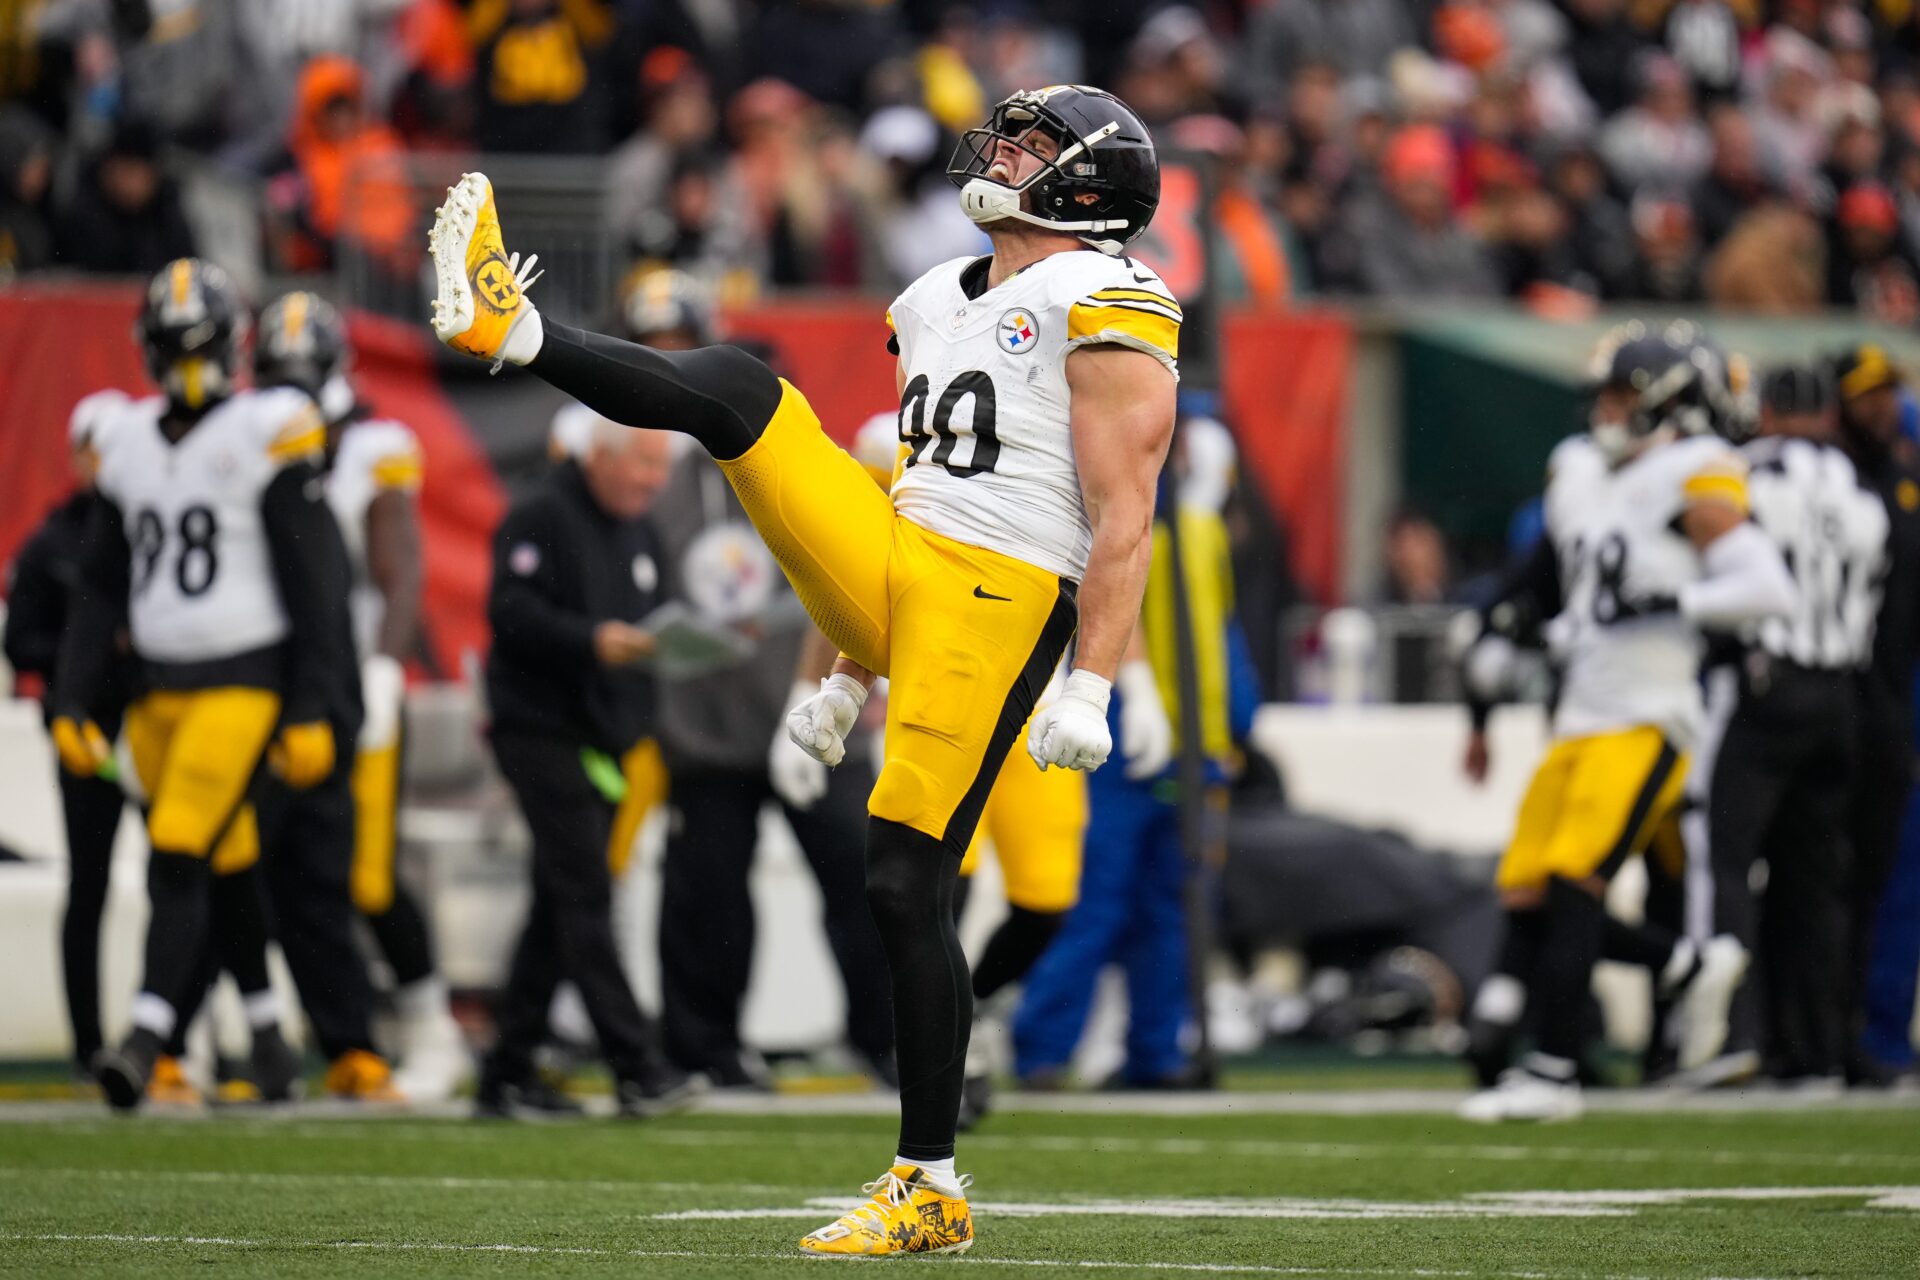 Pittsburgh Steelers linebacker T.J. Watt (90) celebrates after sacking Cincinnati Bengals quarterback Jake Browning (6) in the in the fourth quarter of the NFL Week 12 game between the Cincinnati Bengals and the Pittsburgh Steelers at Paycor Stadium in Cincinnati on Sunday, Nov. 26, 2023. The Steelers took a 16-10 win over the Bengals in Cincinnati.